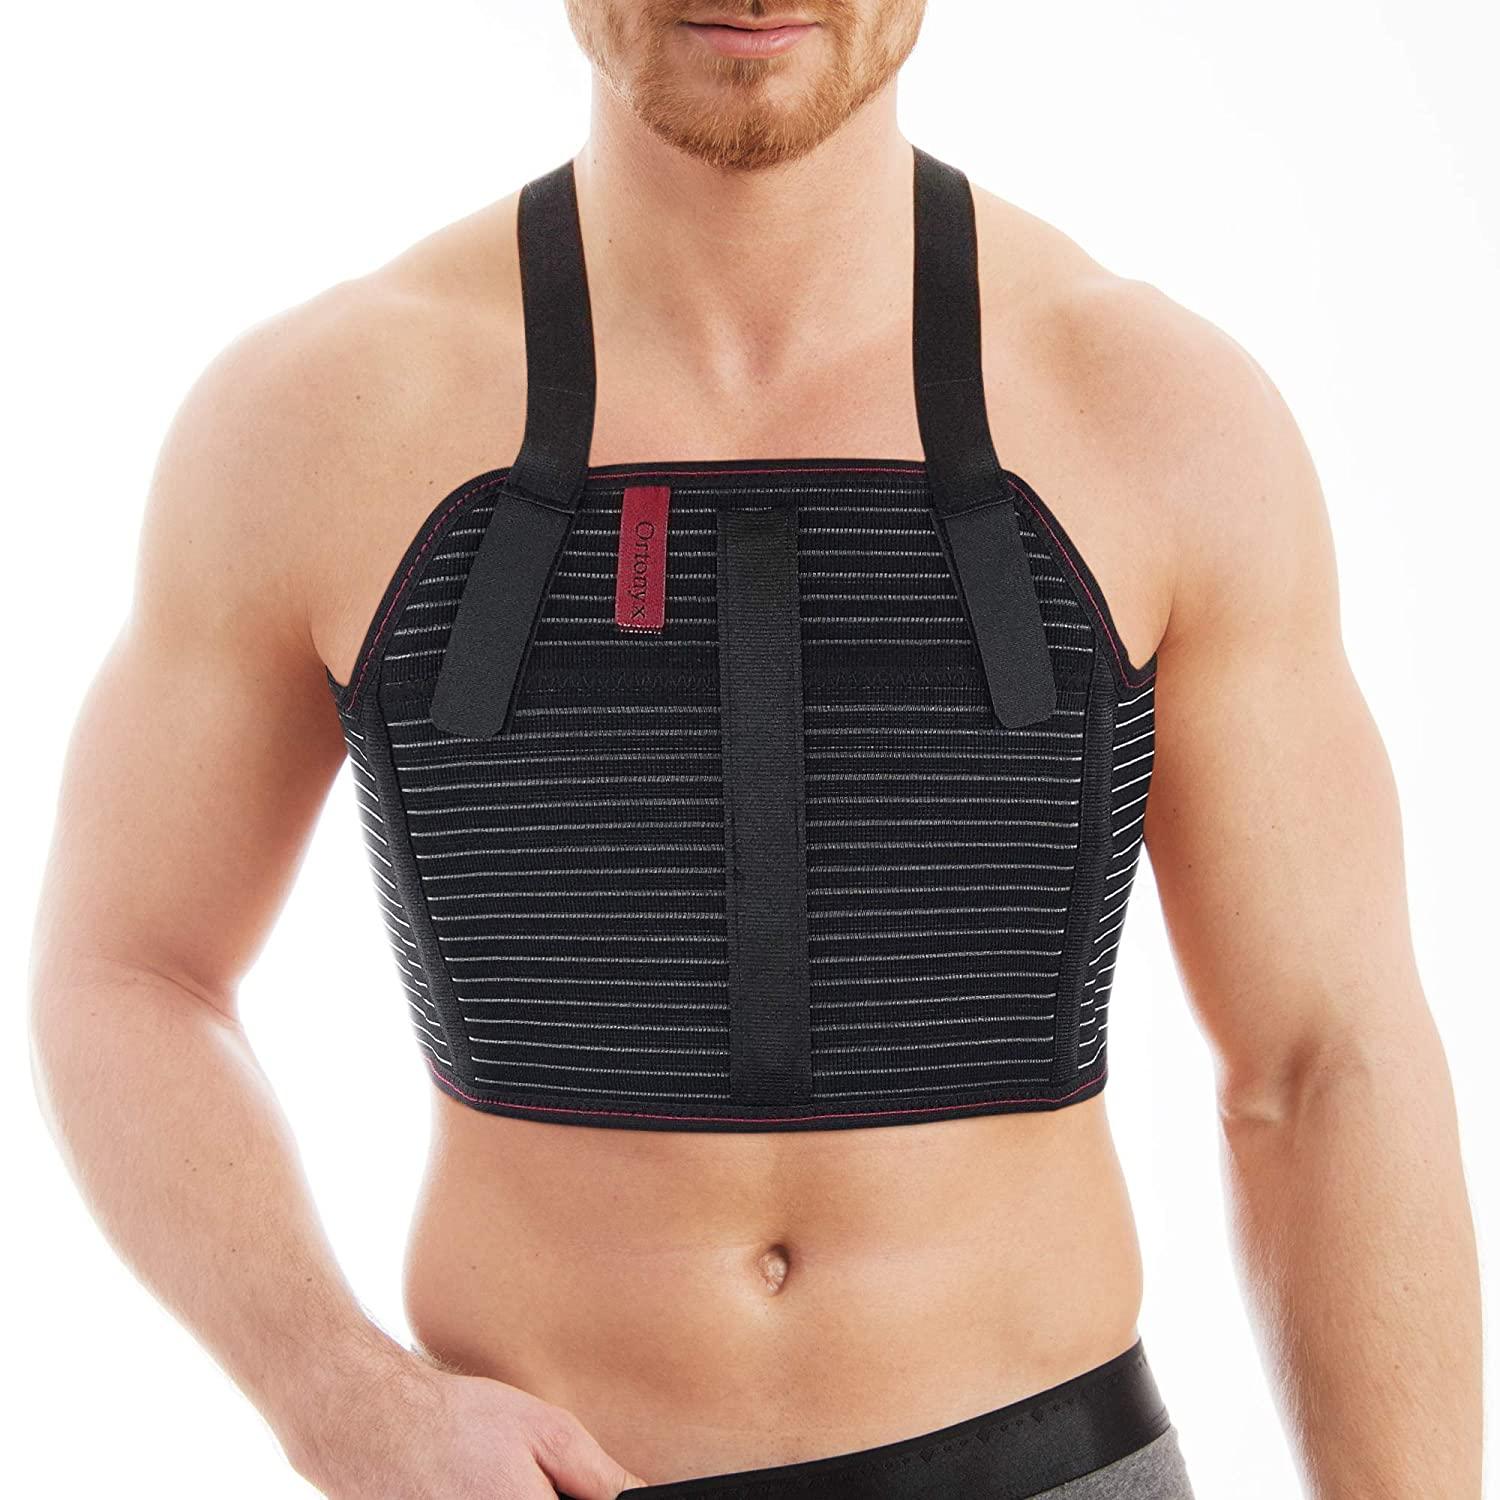 ORTONYX Sternum and Thorax Support Chest Brace Post Open Heart Surgery  Rehabilitation, Broken, Cracked, Fractured, Dislocated Ribs Compression Aid  /